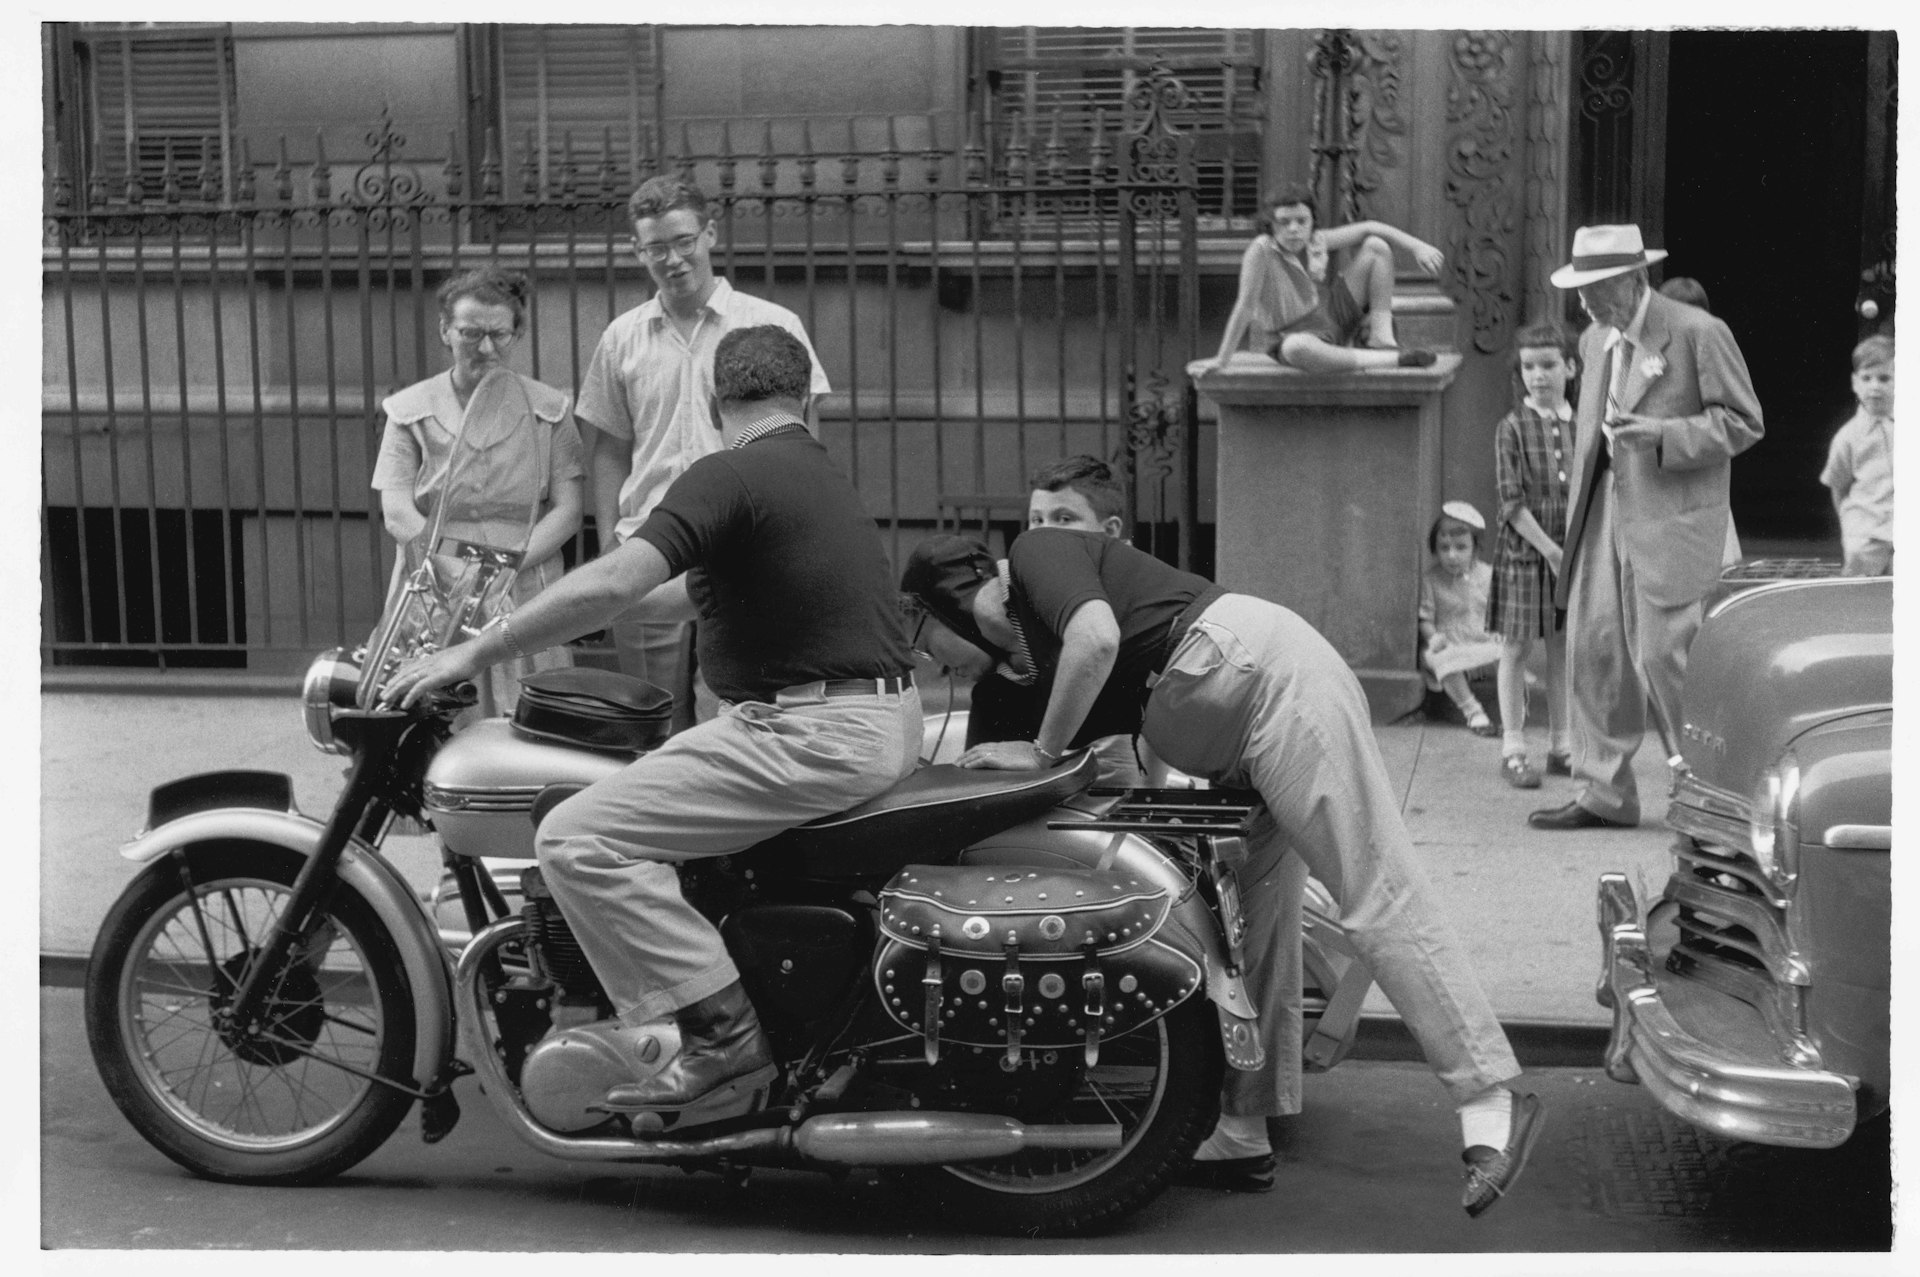 Vermont family on a motorcycle, 1957